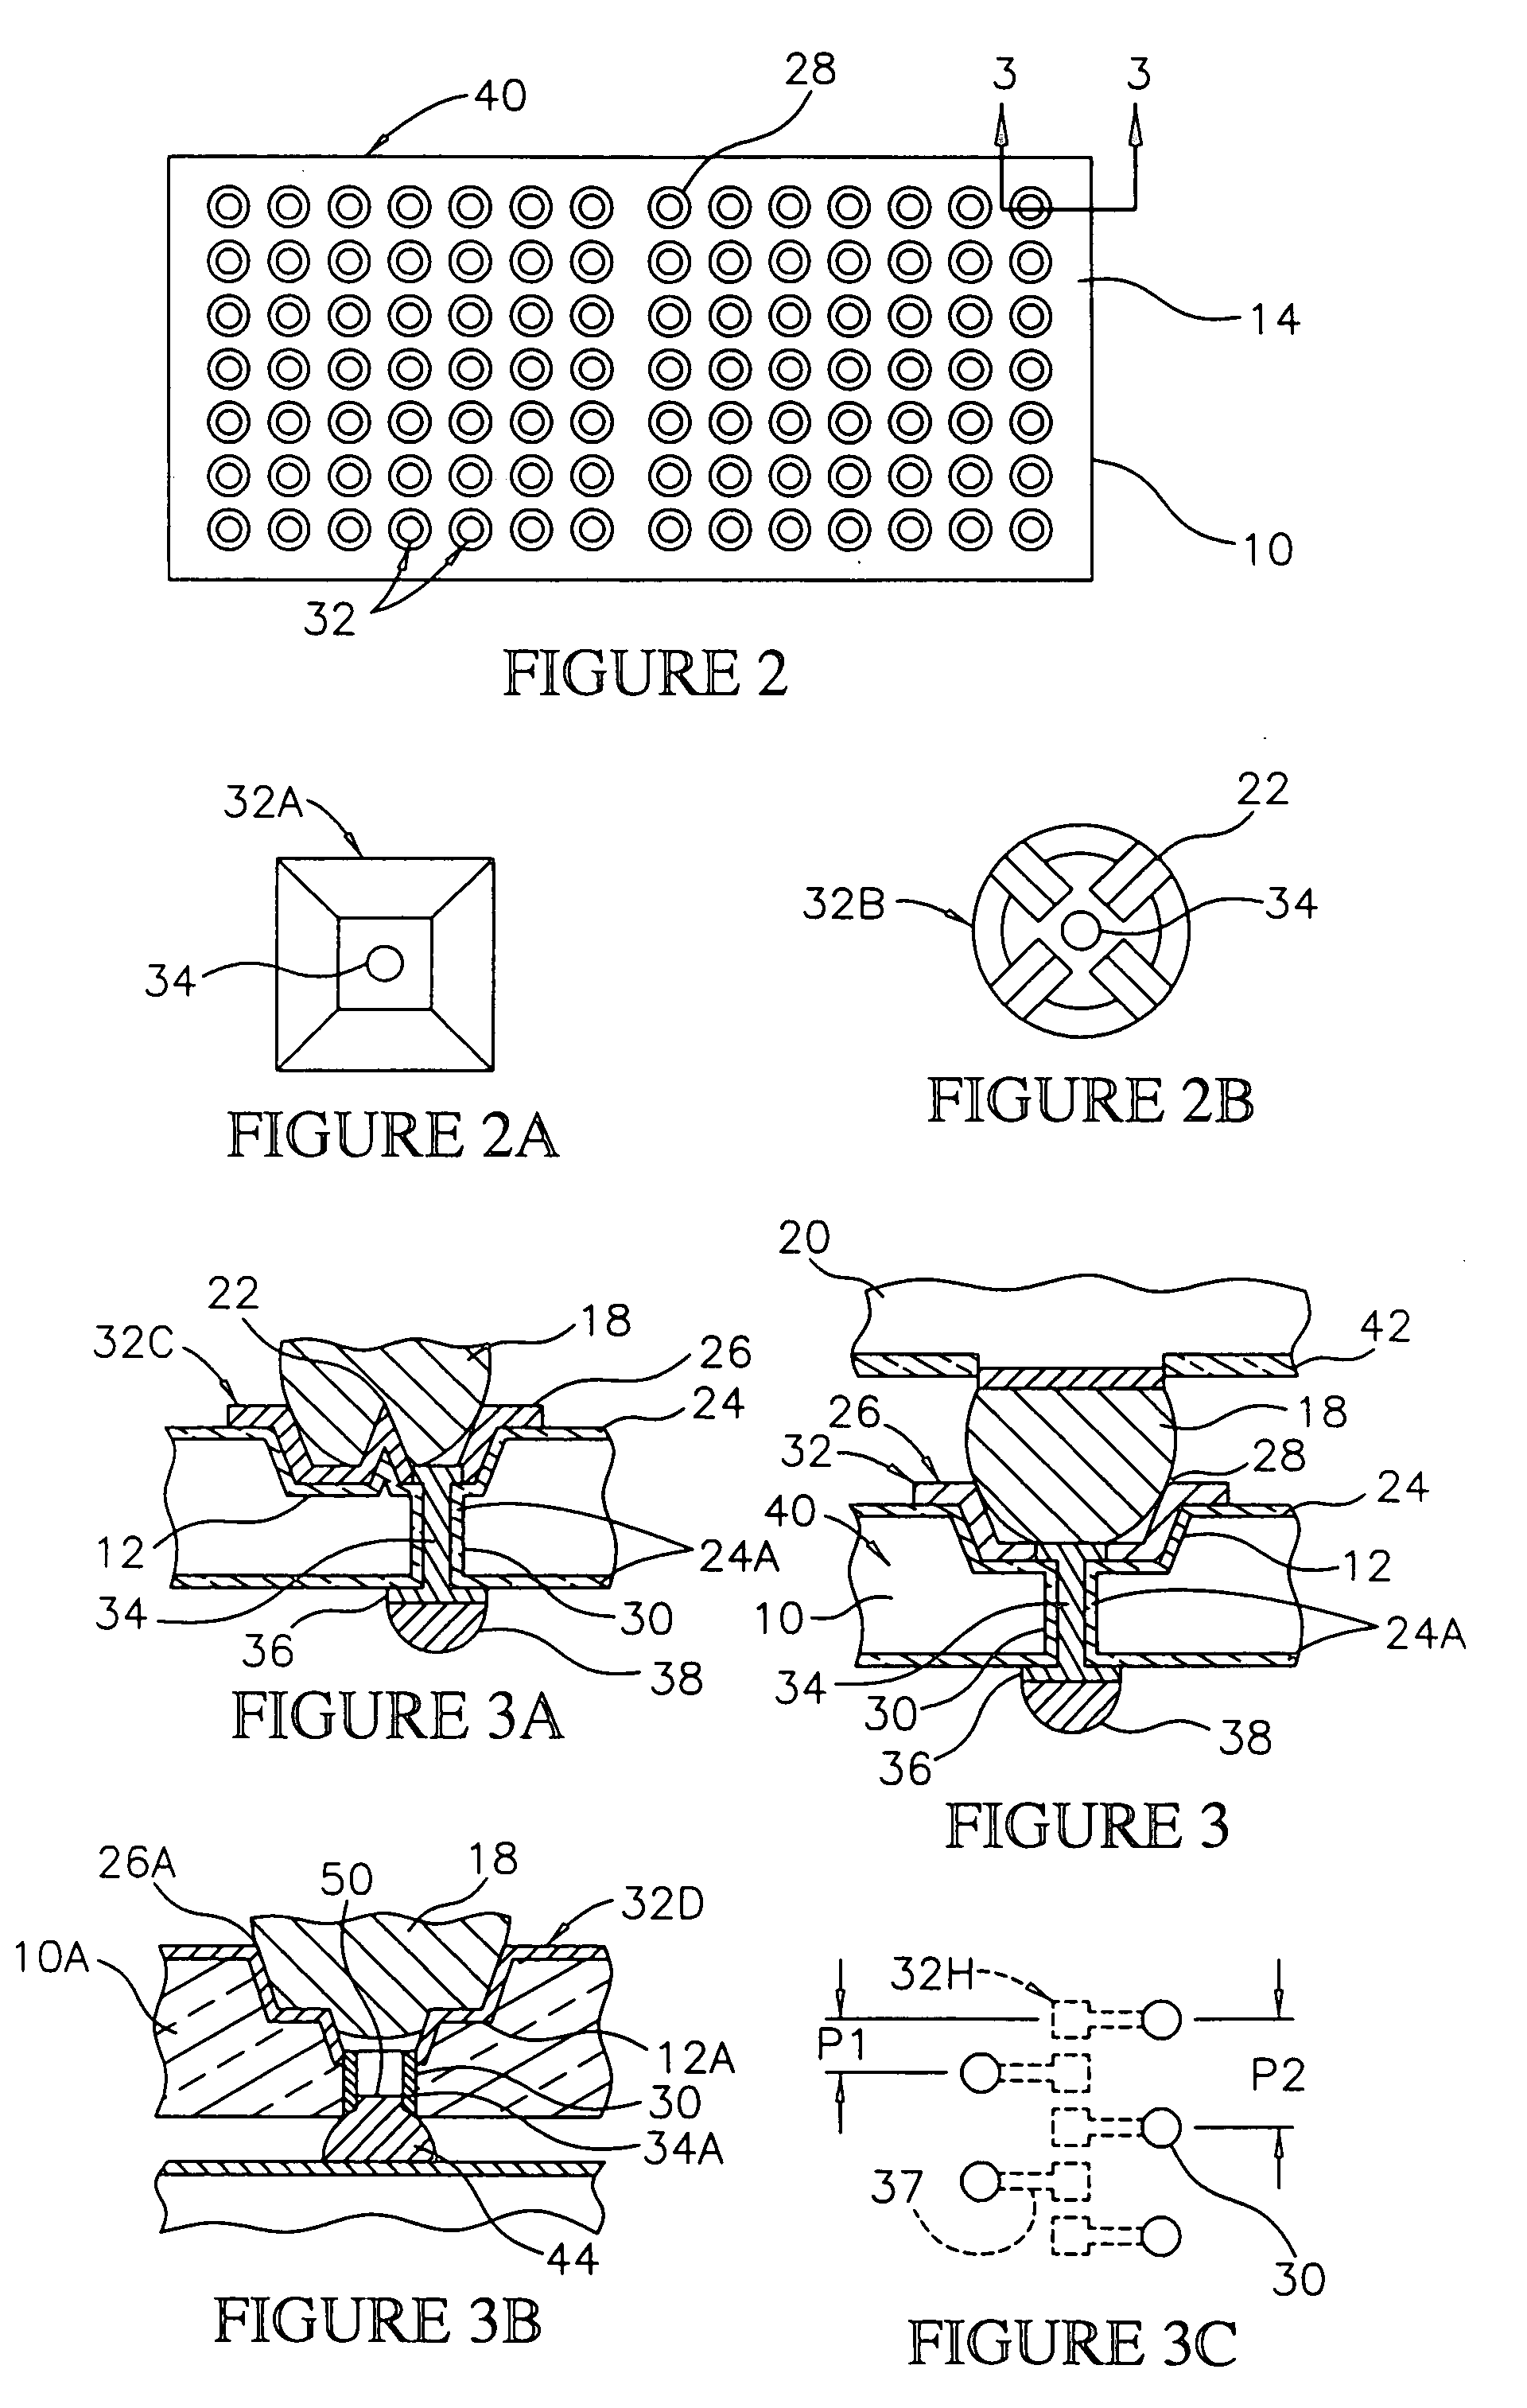 Method for fabricating semiconductor components by forming conductive members using solder